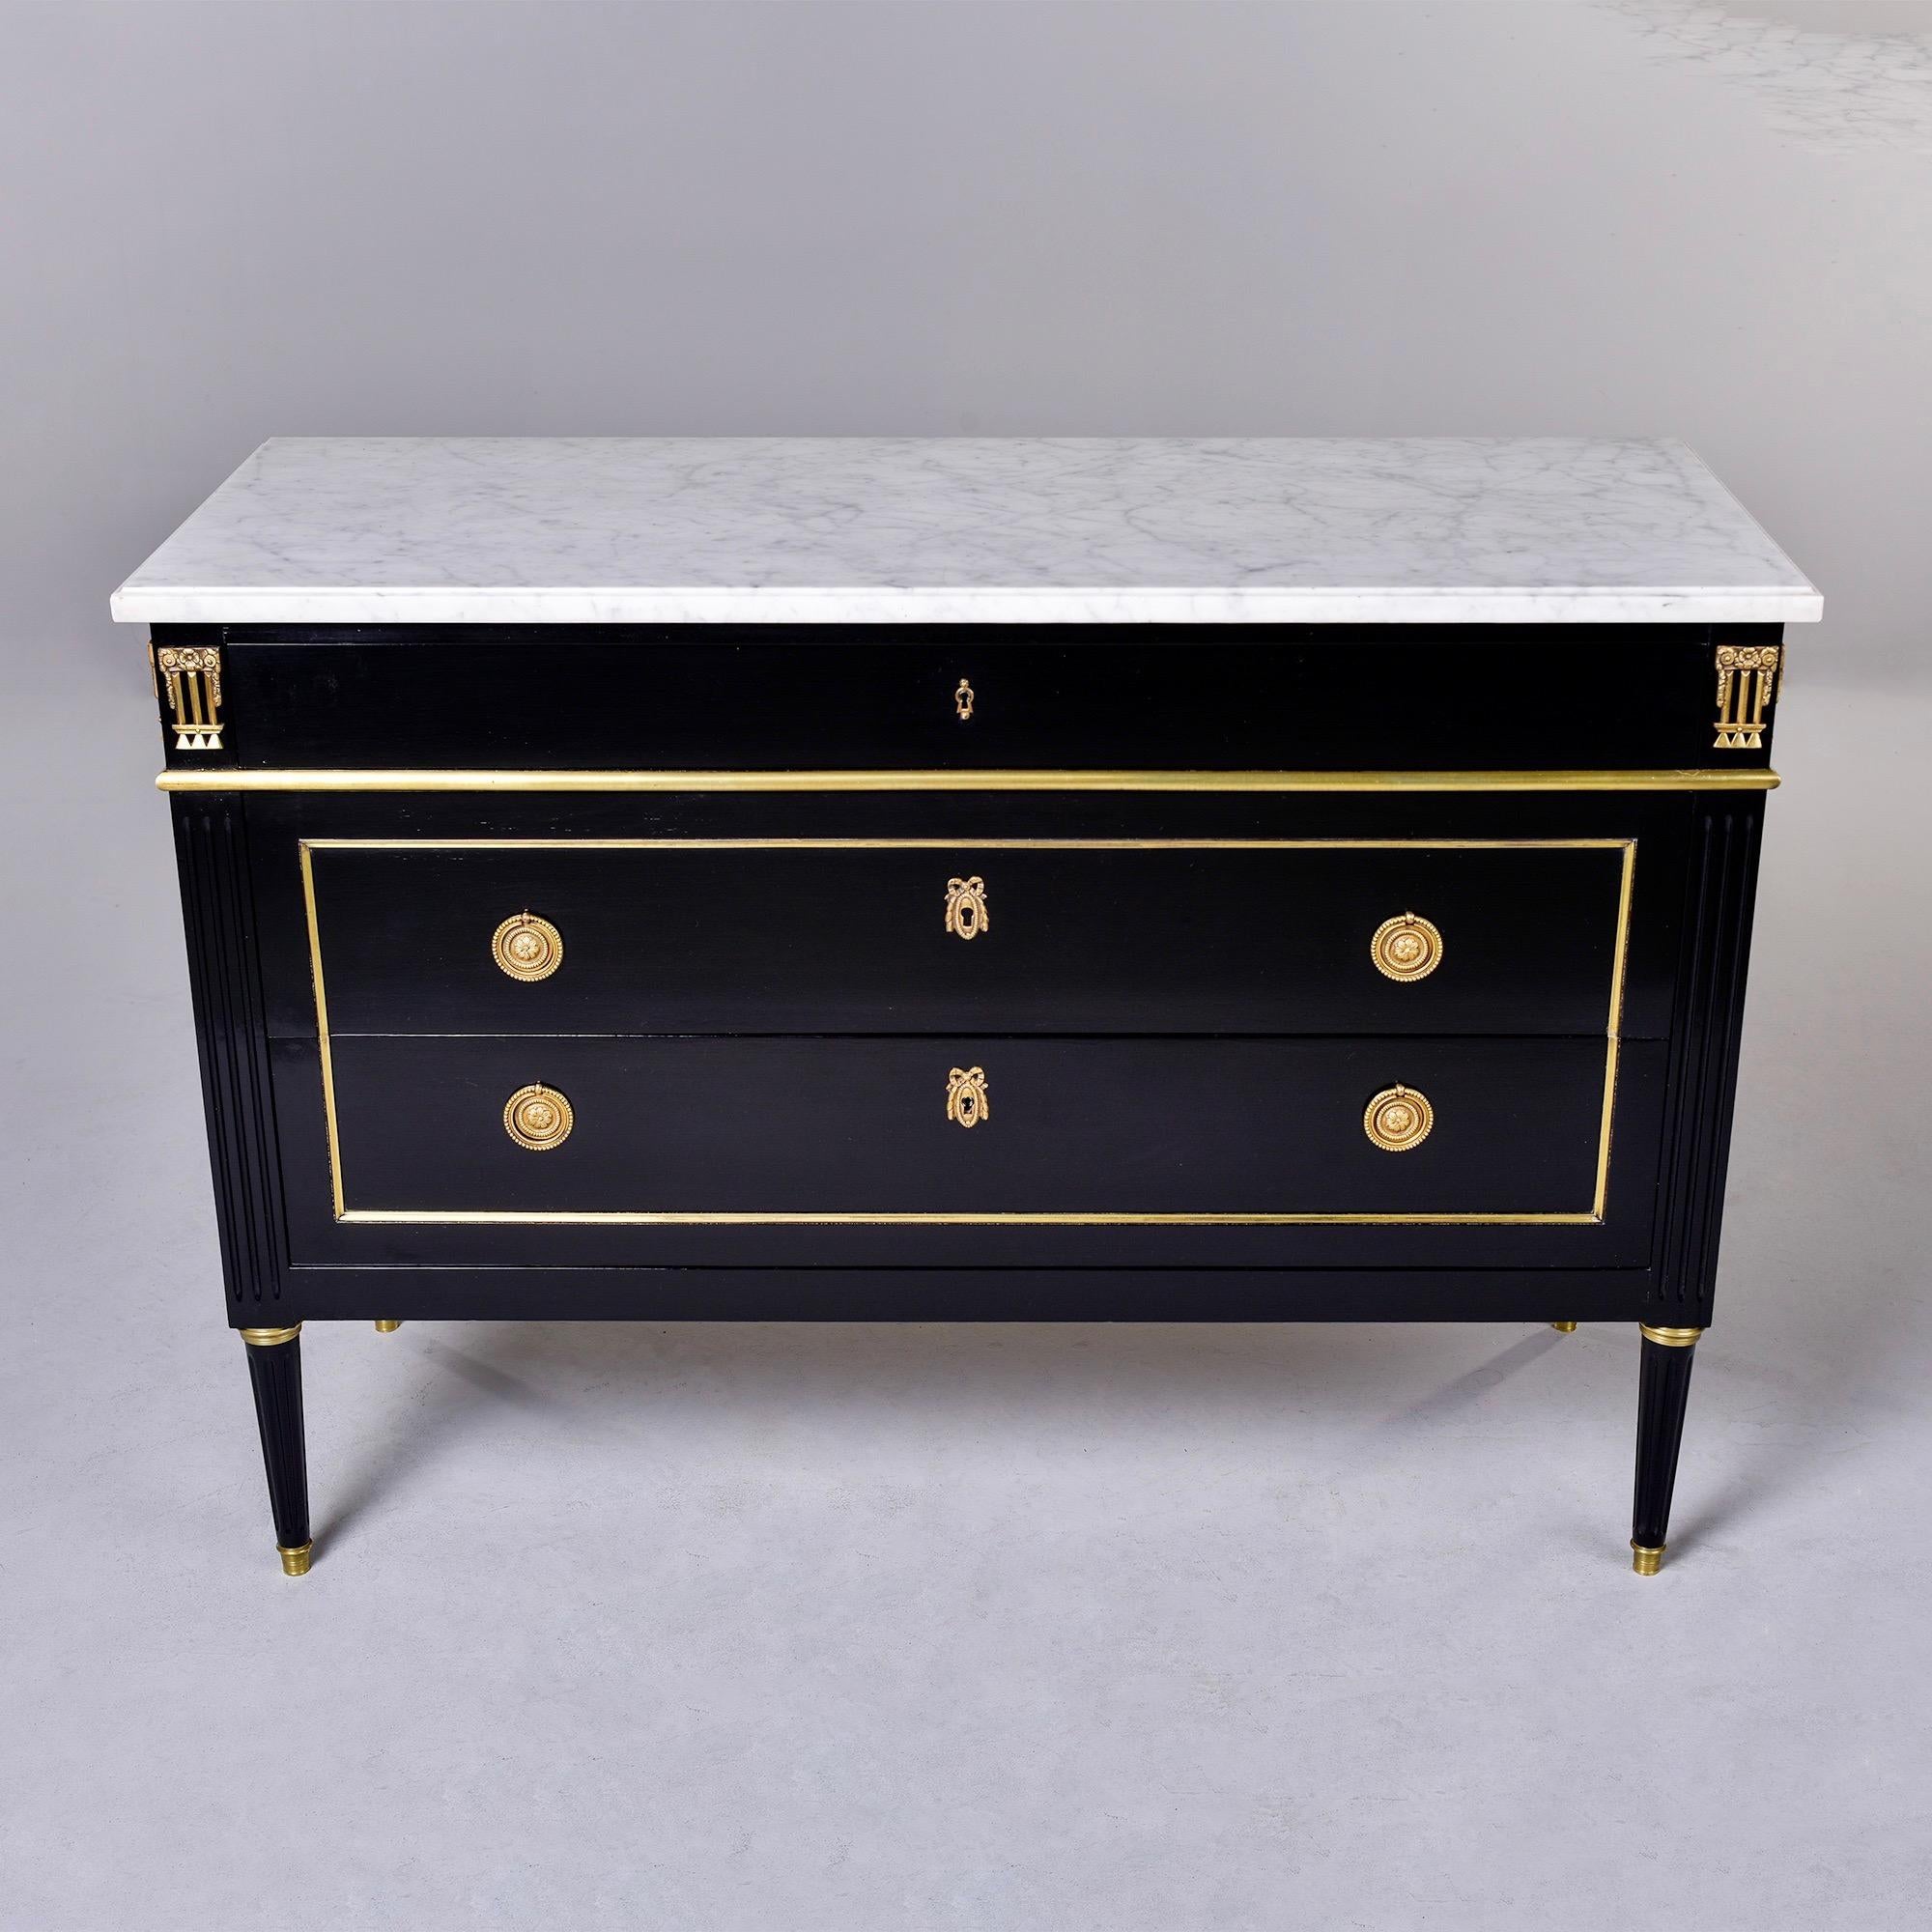 Circa 1900 Louis XVI style commode of ebonised mahogany with brass mounts and white marble top. Commode has a narrow locking top drawer with decorative brass mounts and two larger drawers below that lock with a skeleton key. Brass trim on drawer